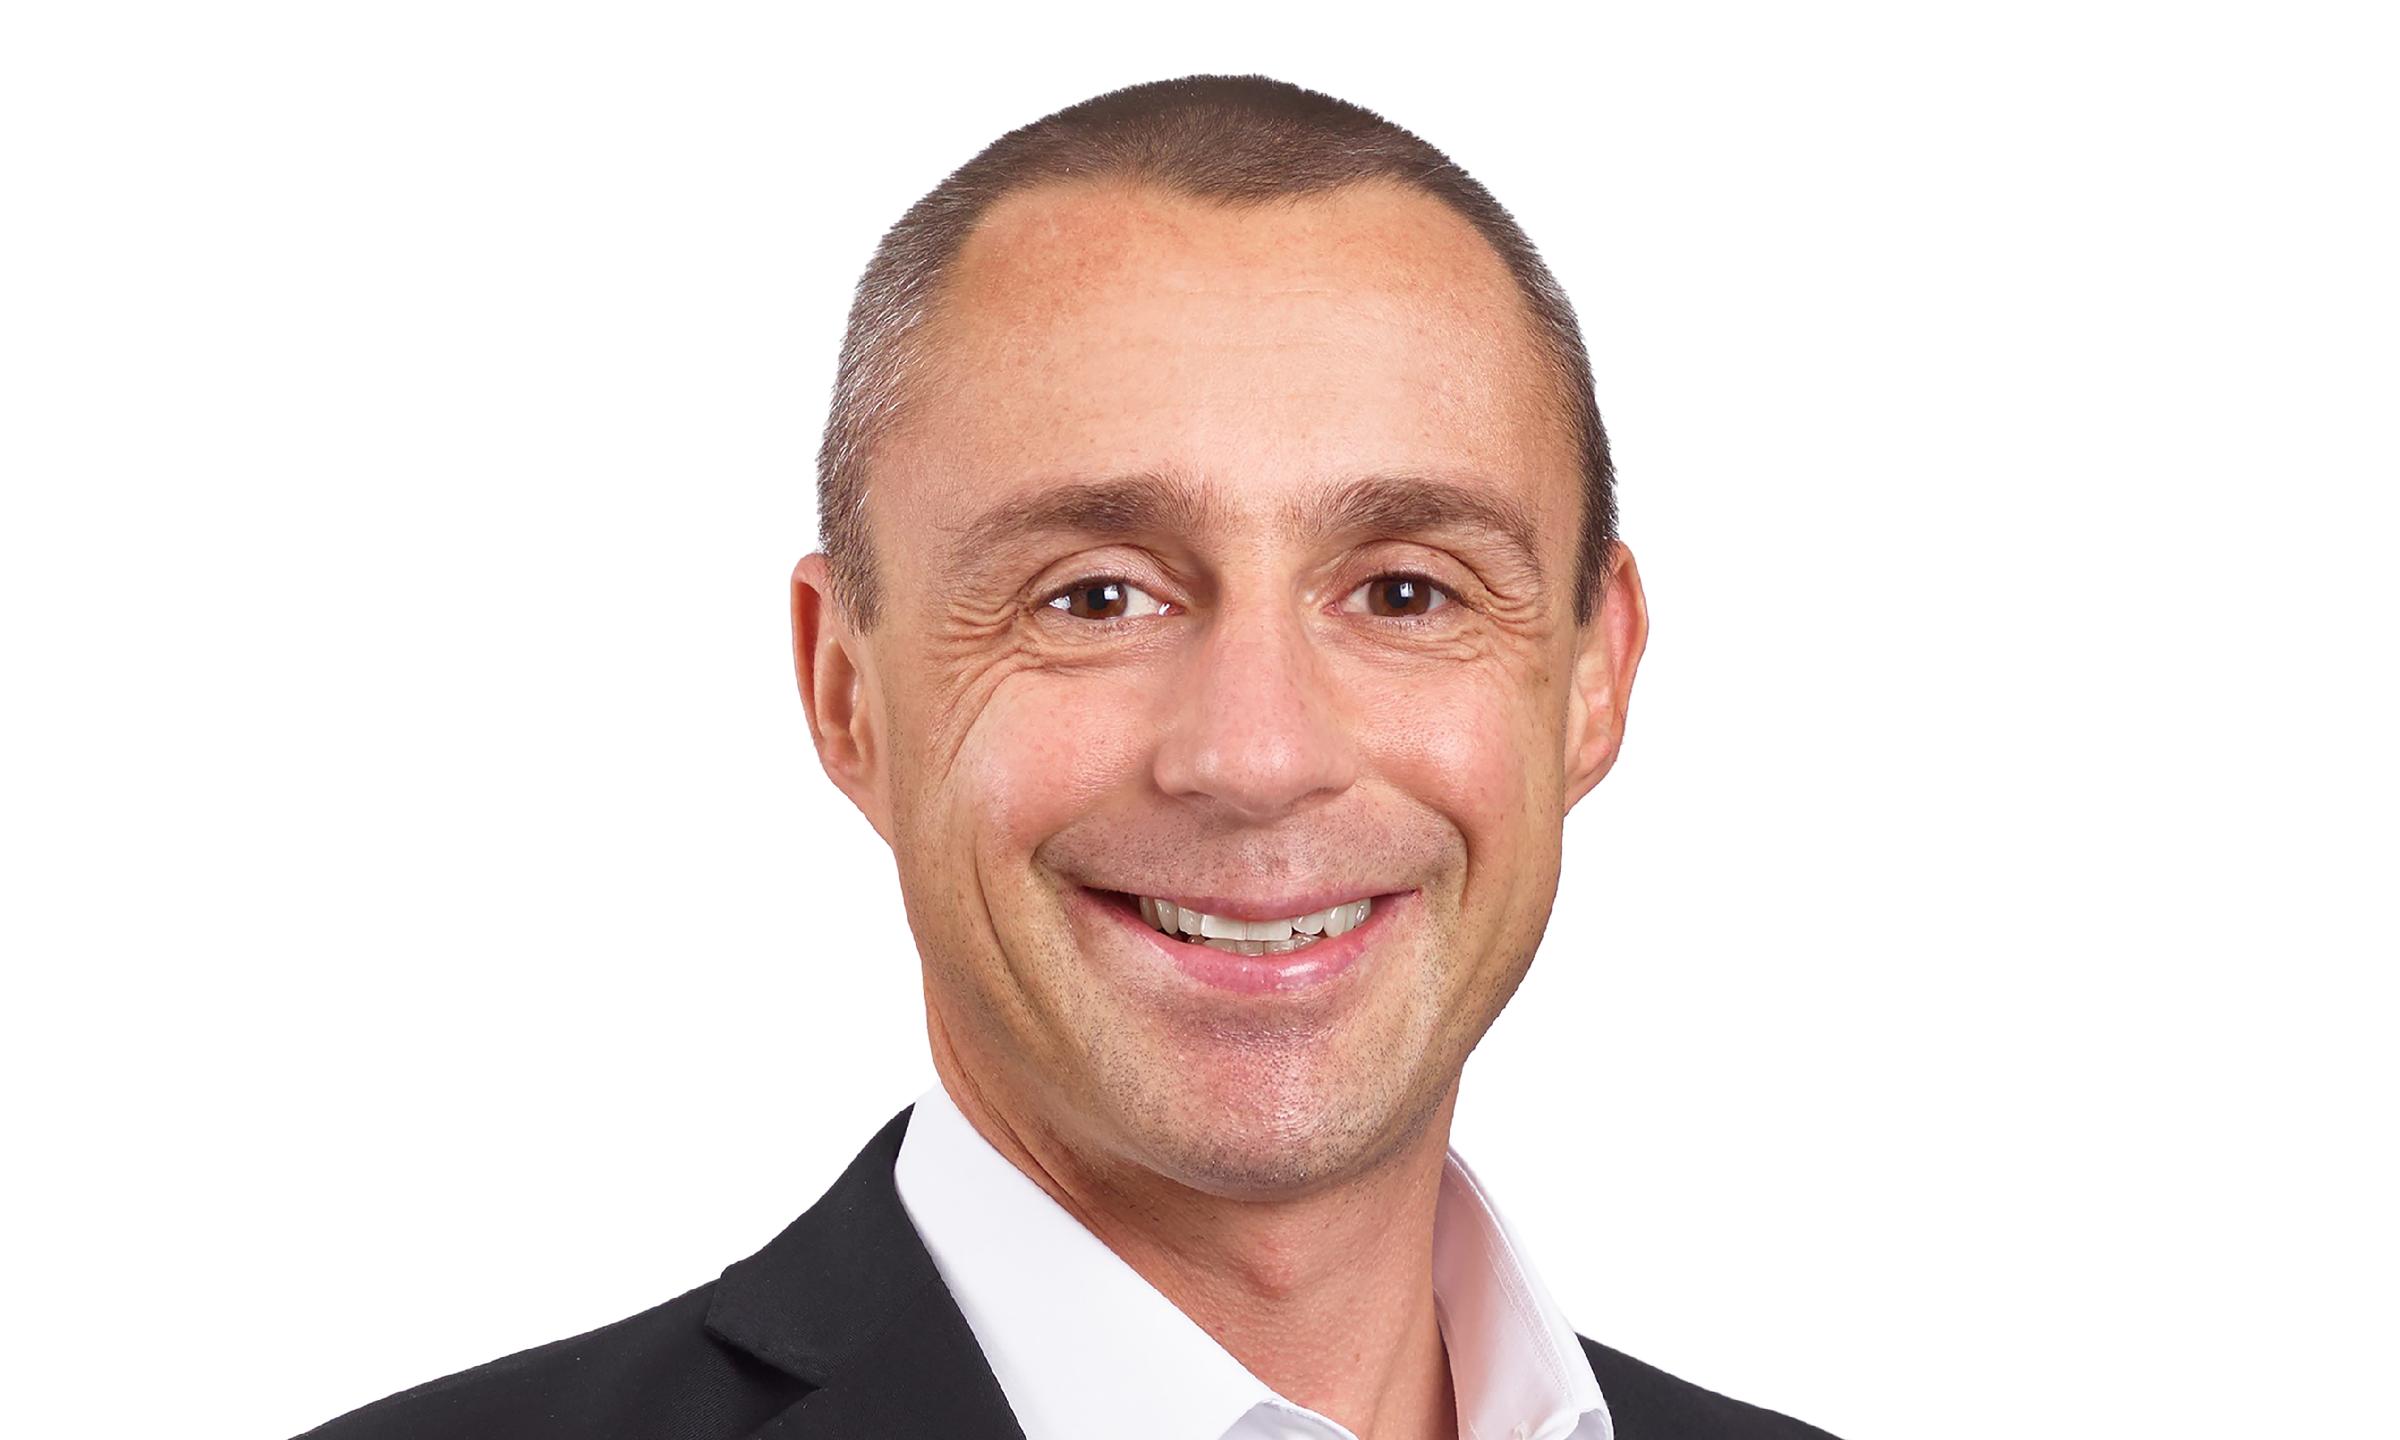 Assa Abloy Opening Solutions EMEIA ernennt neuen Senior Vice President & Head of Digital and Access Solutions.